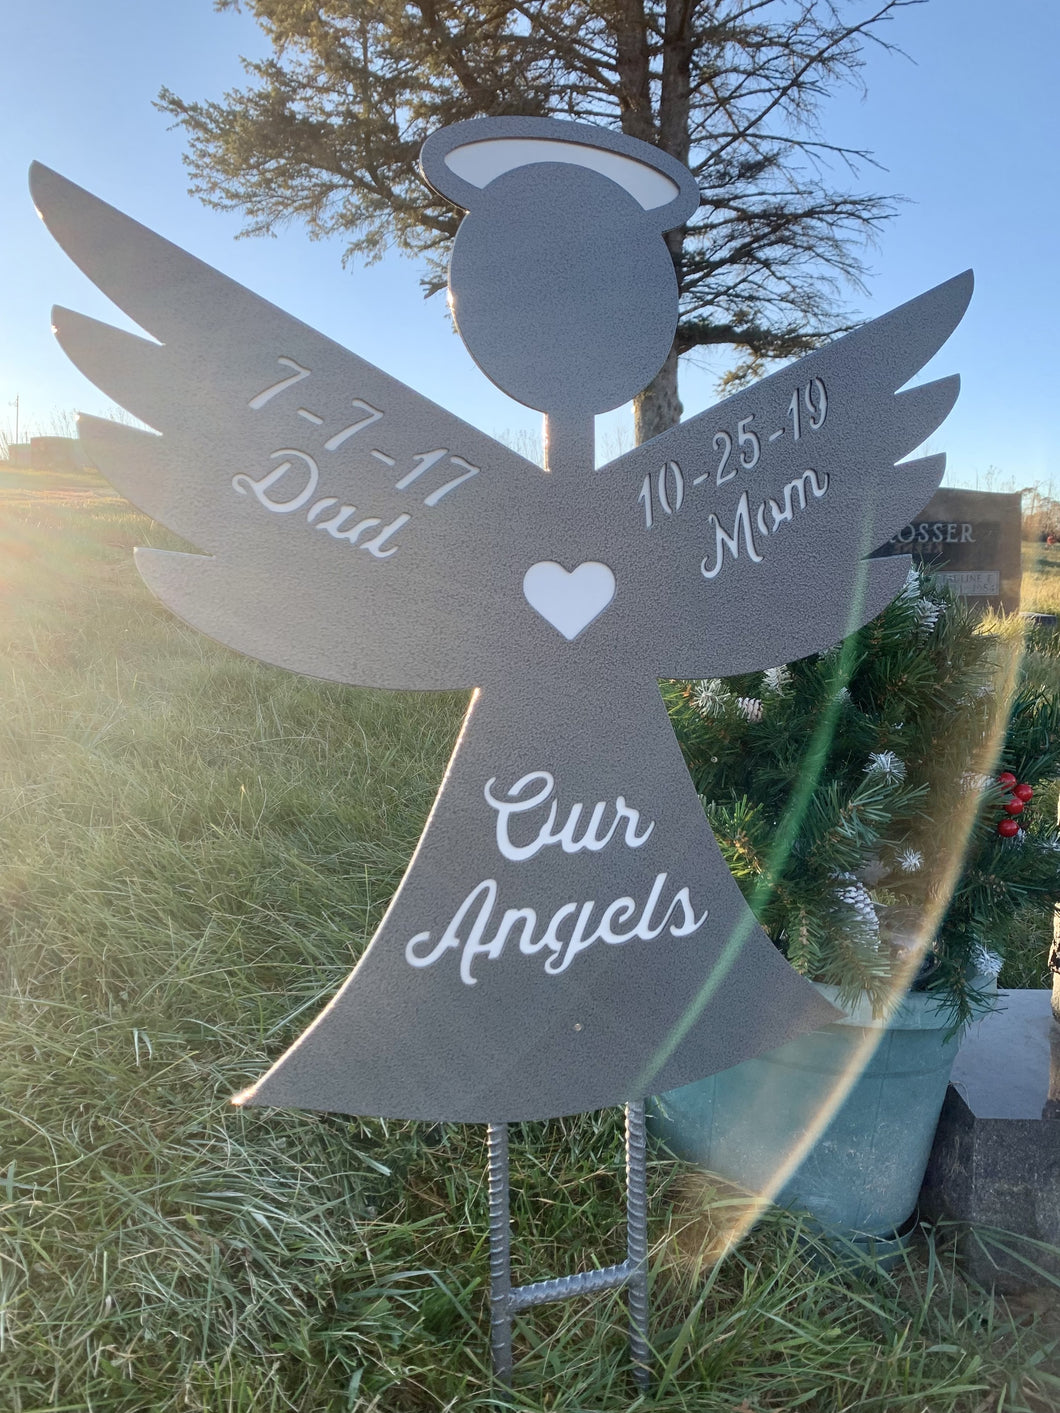 Personalized Angel Sign